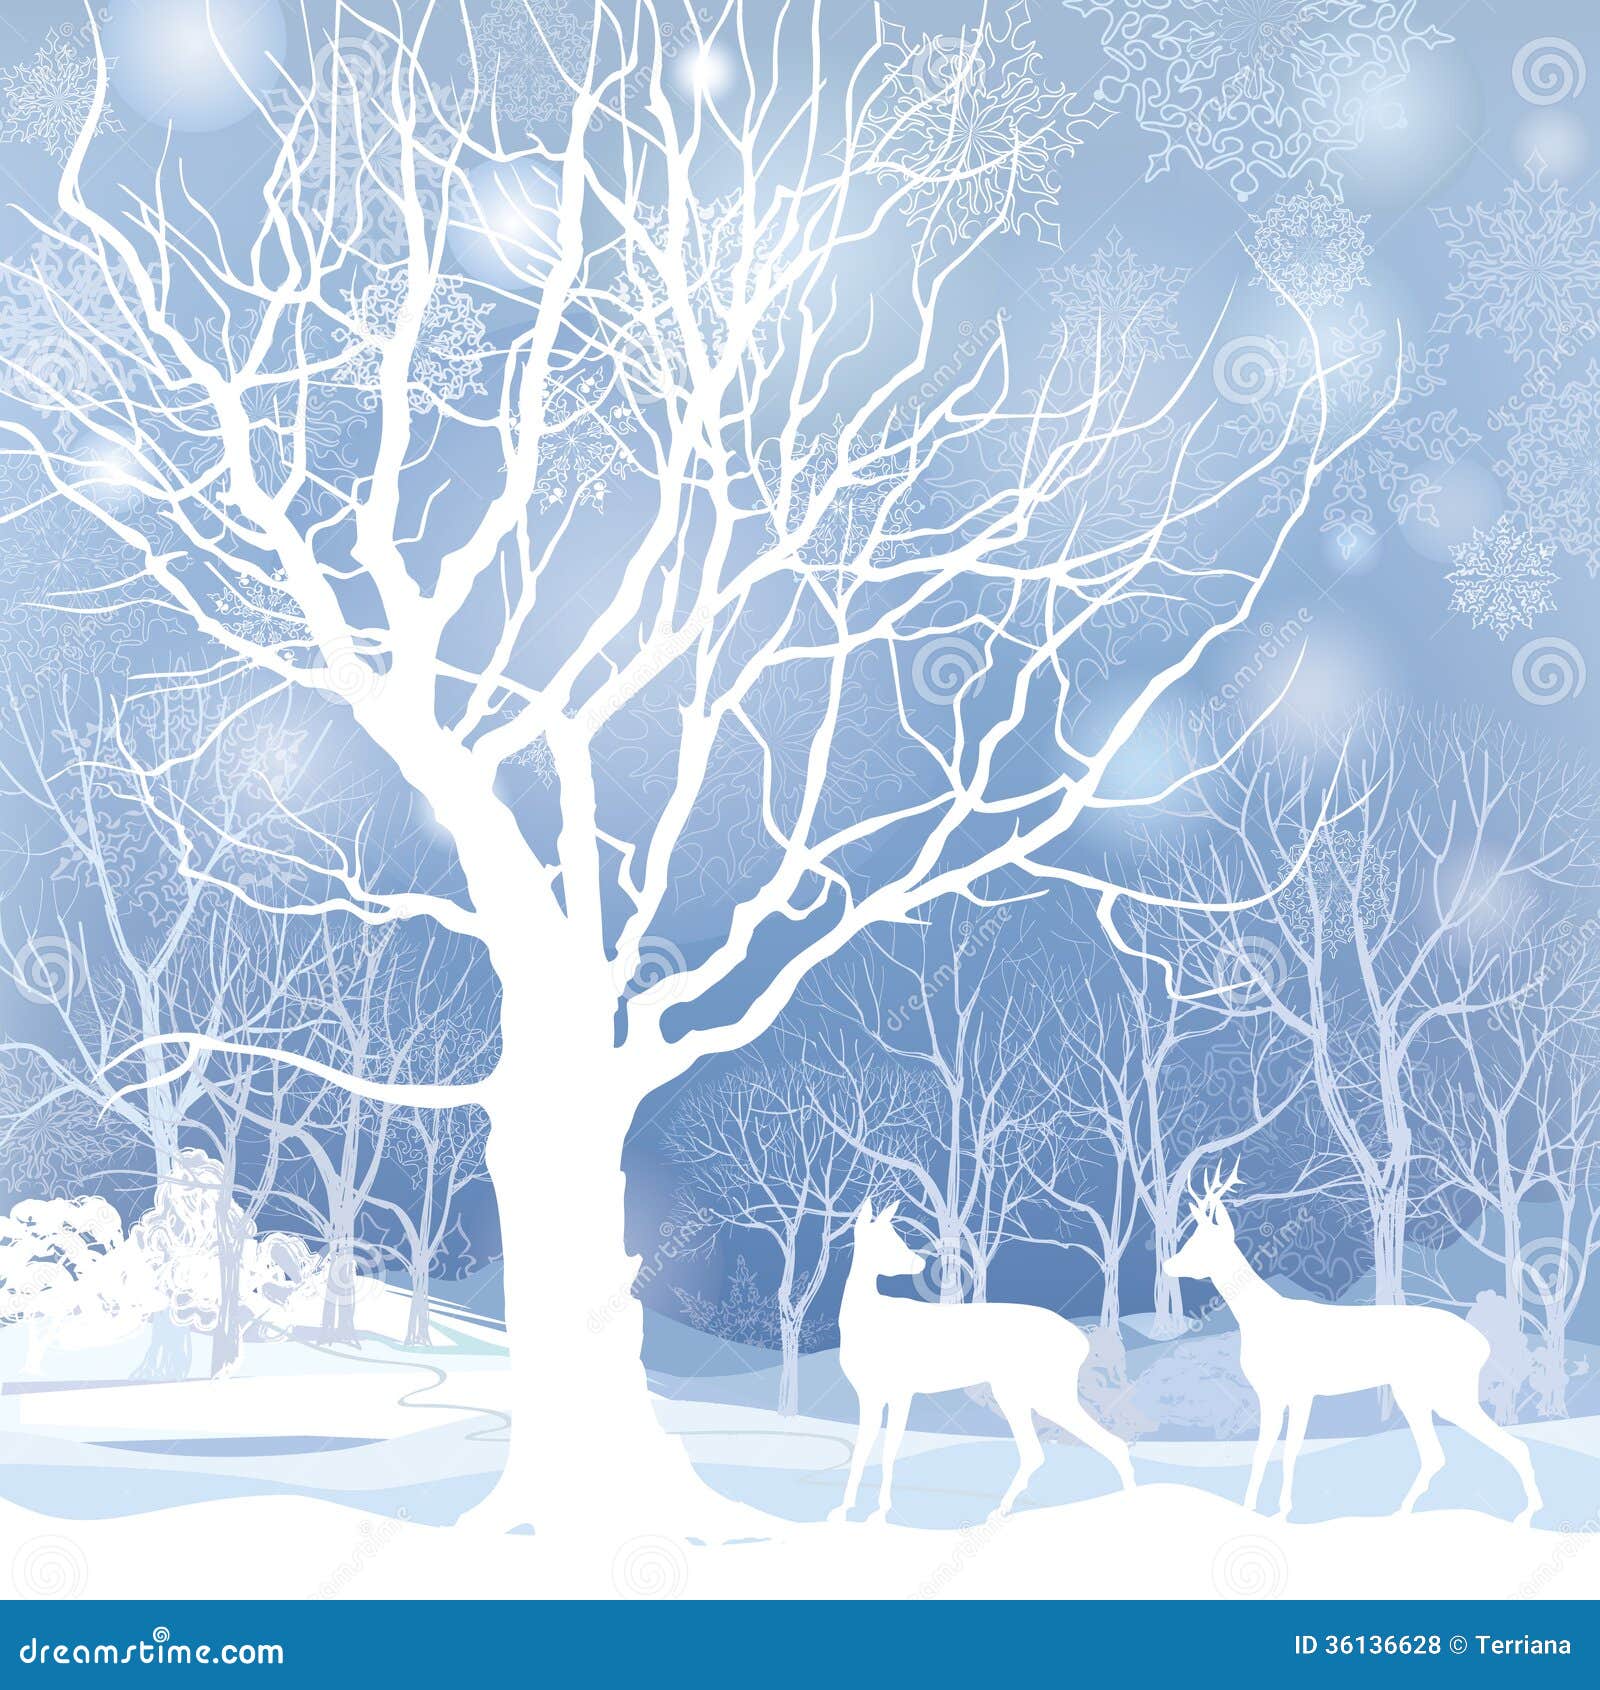 snowy forest clipart - photo #15